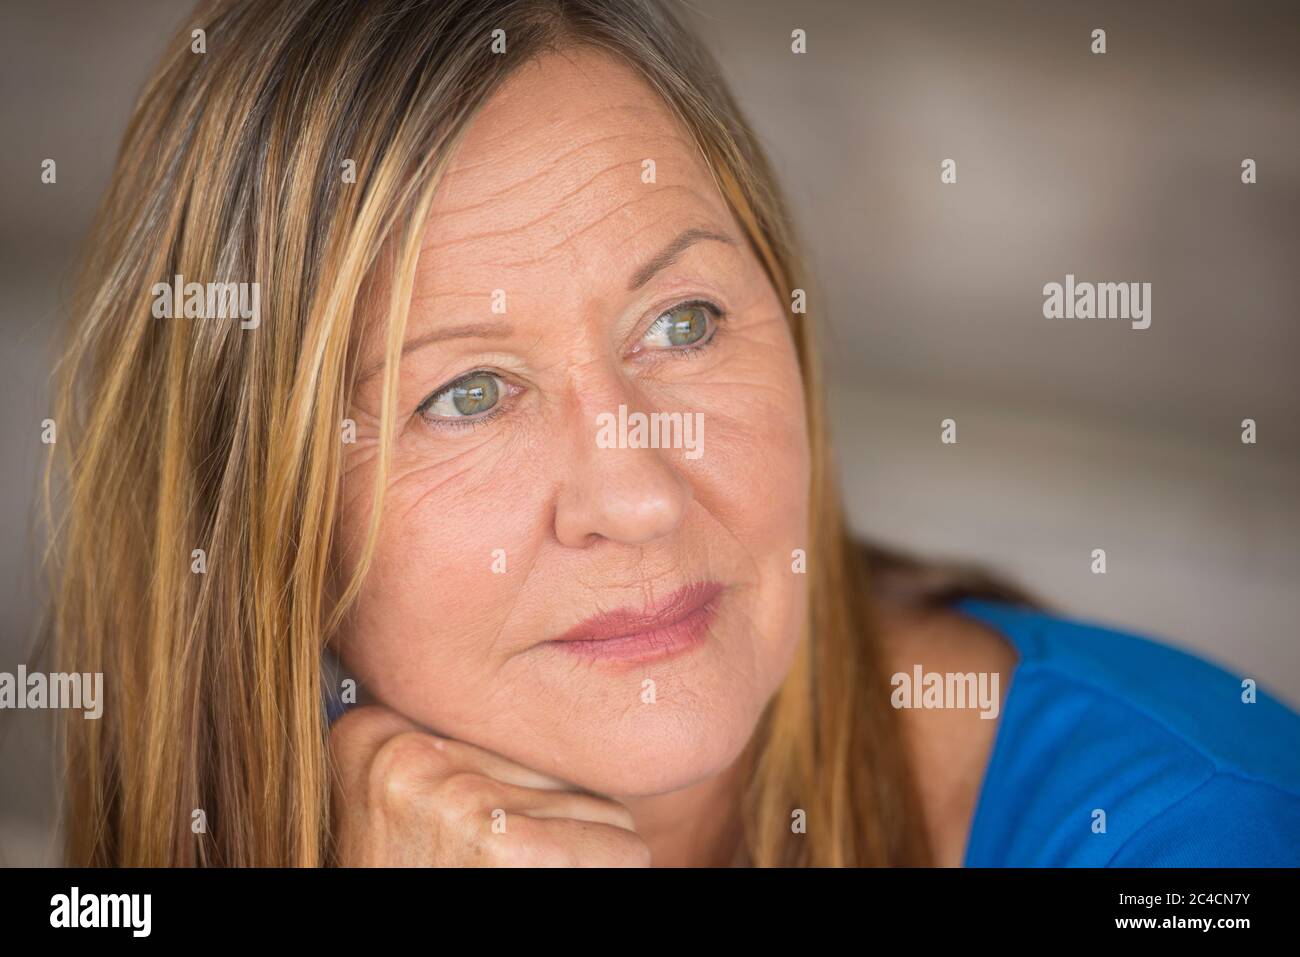 Portrait attractive mature woman with thoughtful serious facial expression, relaxed, laid back, peaceful daydreaming, blurred background. Stock Photo